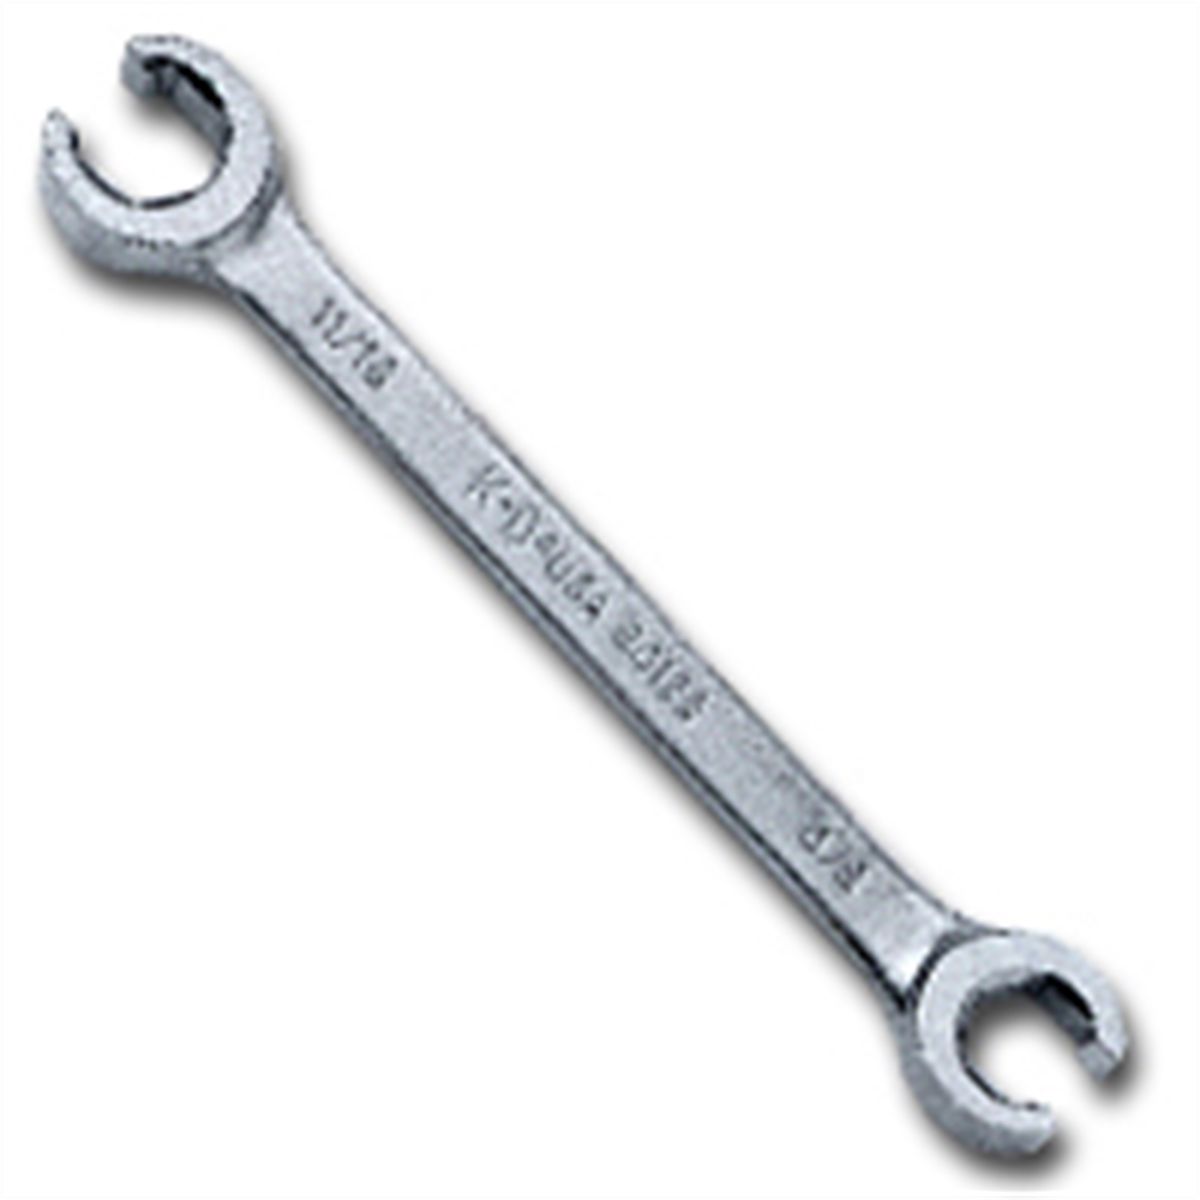 Flare Nut Wrench - 5/8 x 11/16In